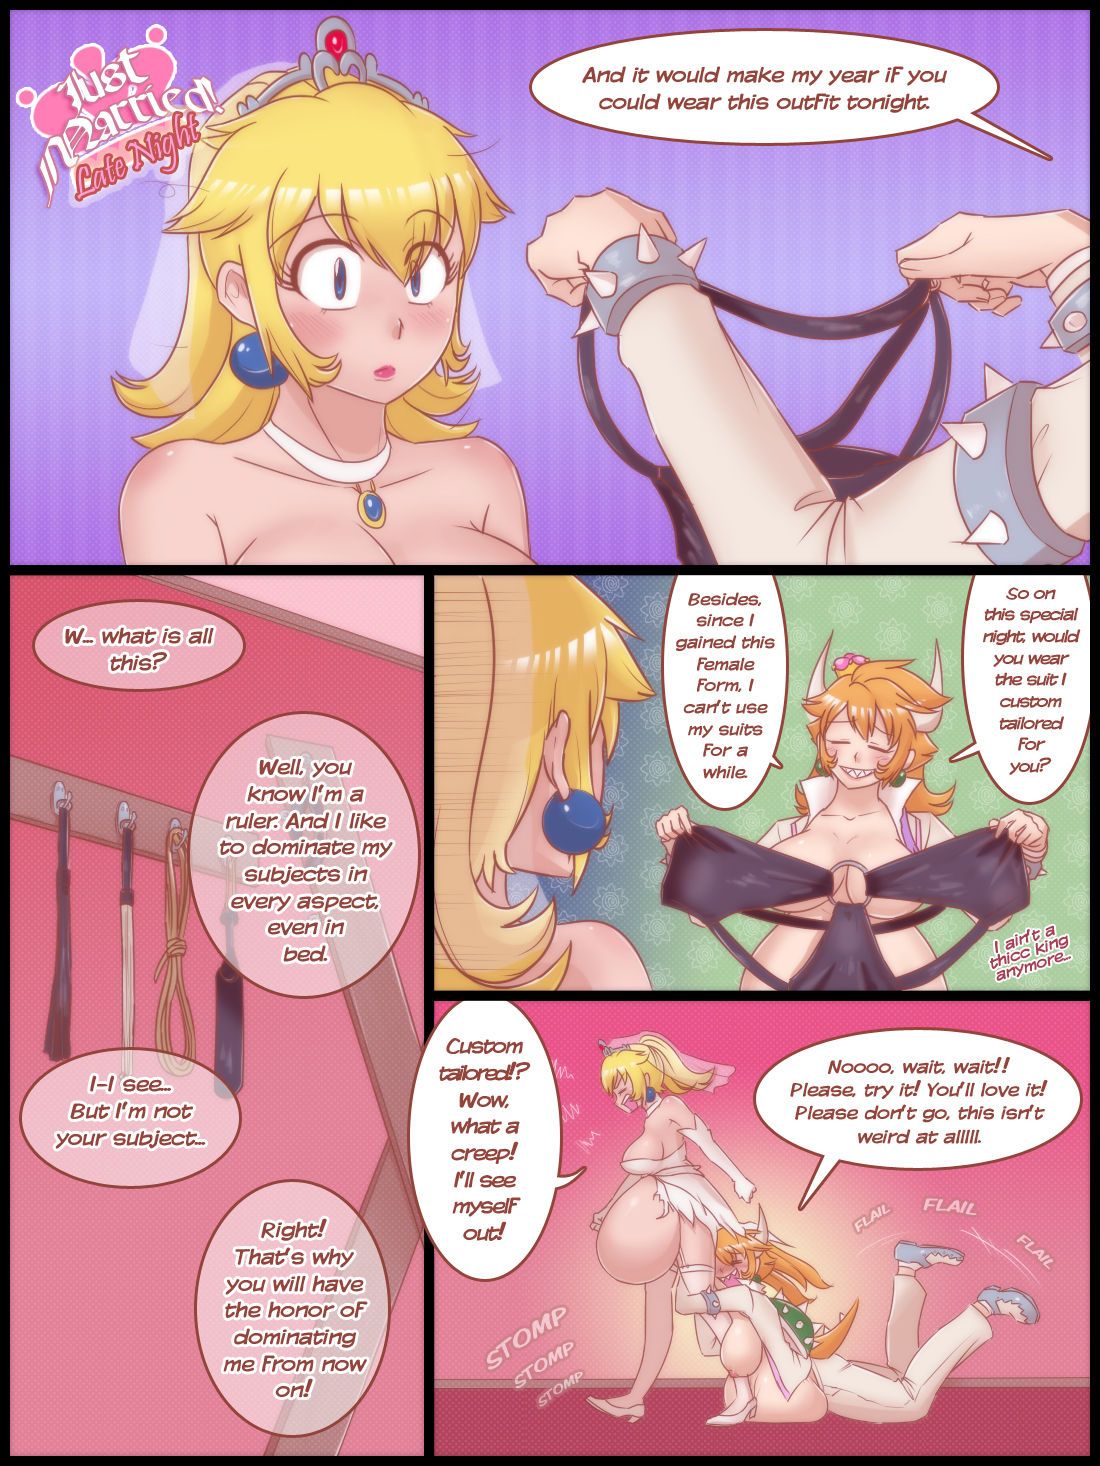 [Malezor] Just Married - Late Night (Super Mario Bros.) [Ongoing] 2